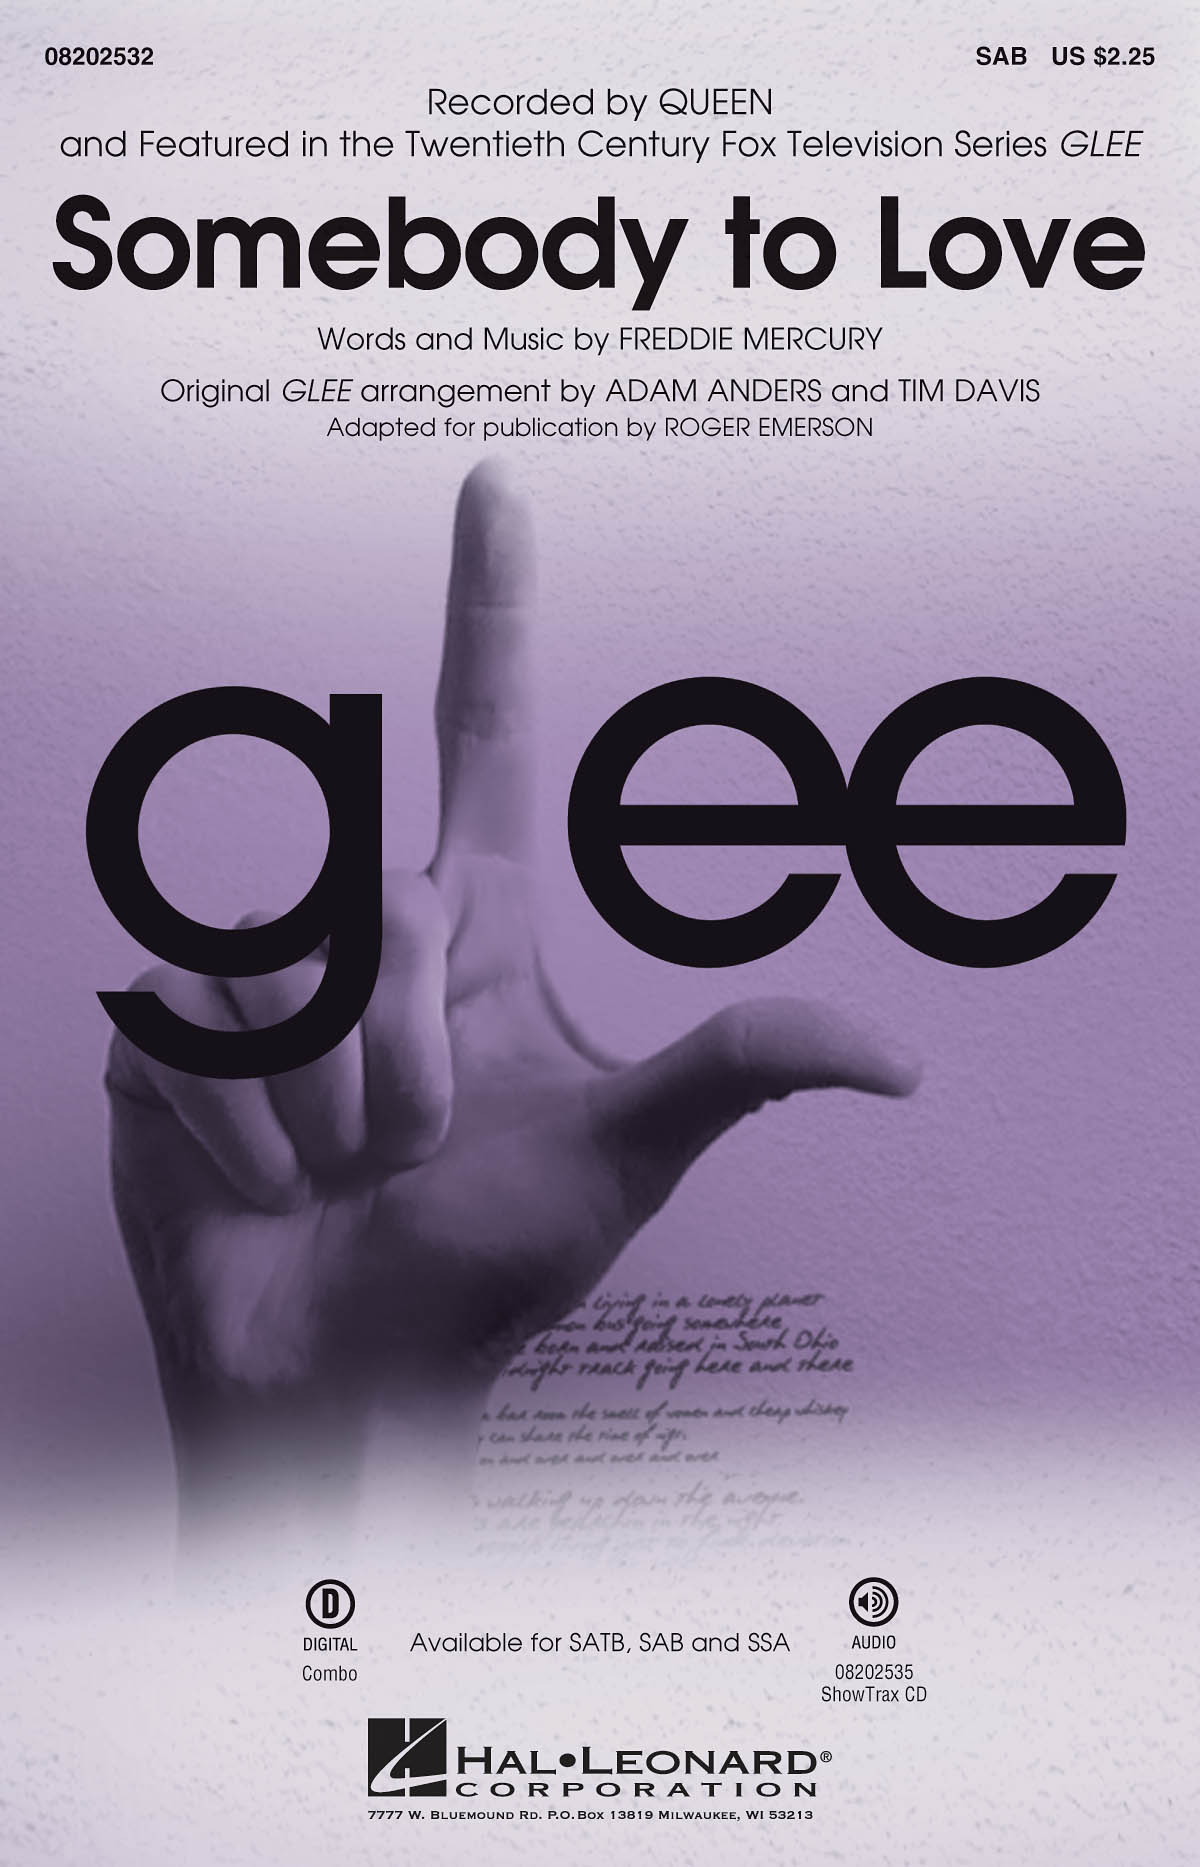 Somebody to Love from Glee (SAB)